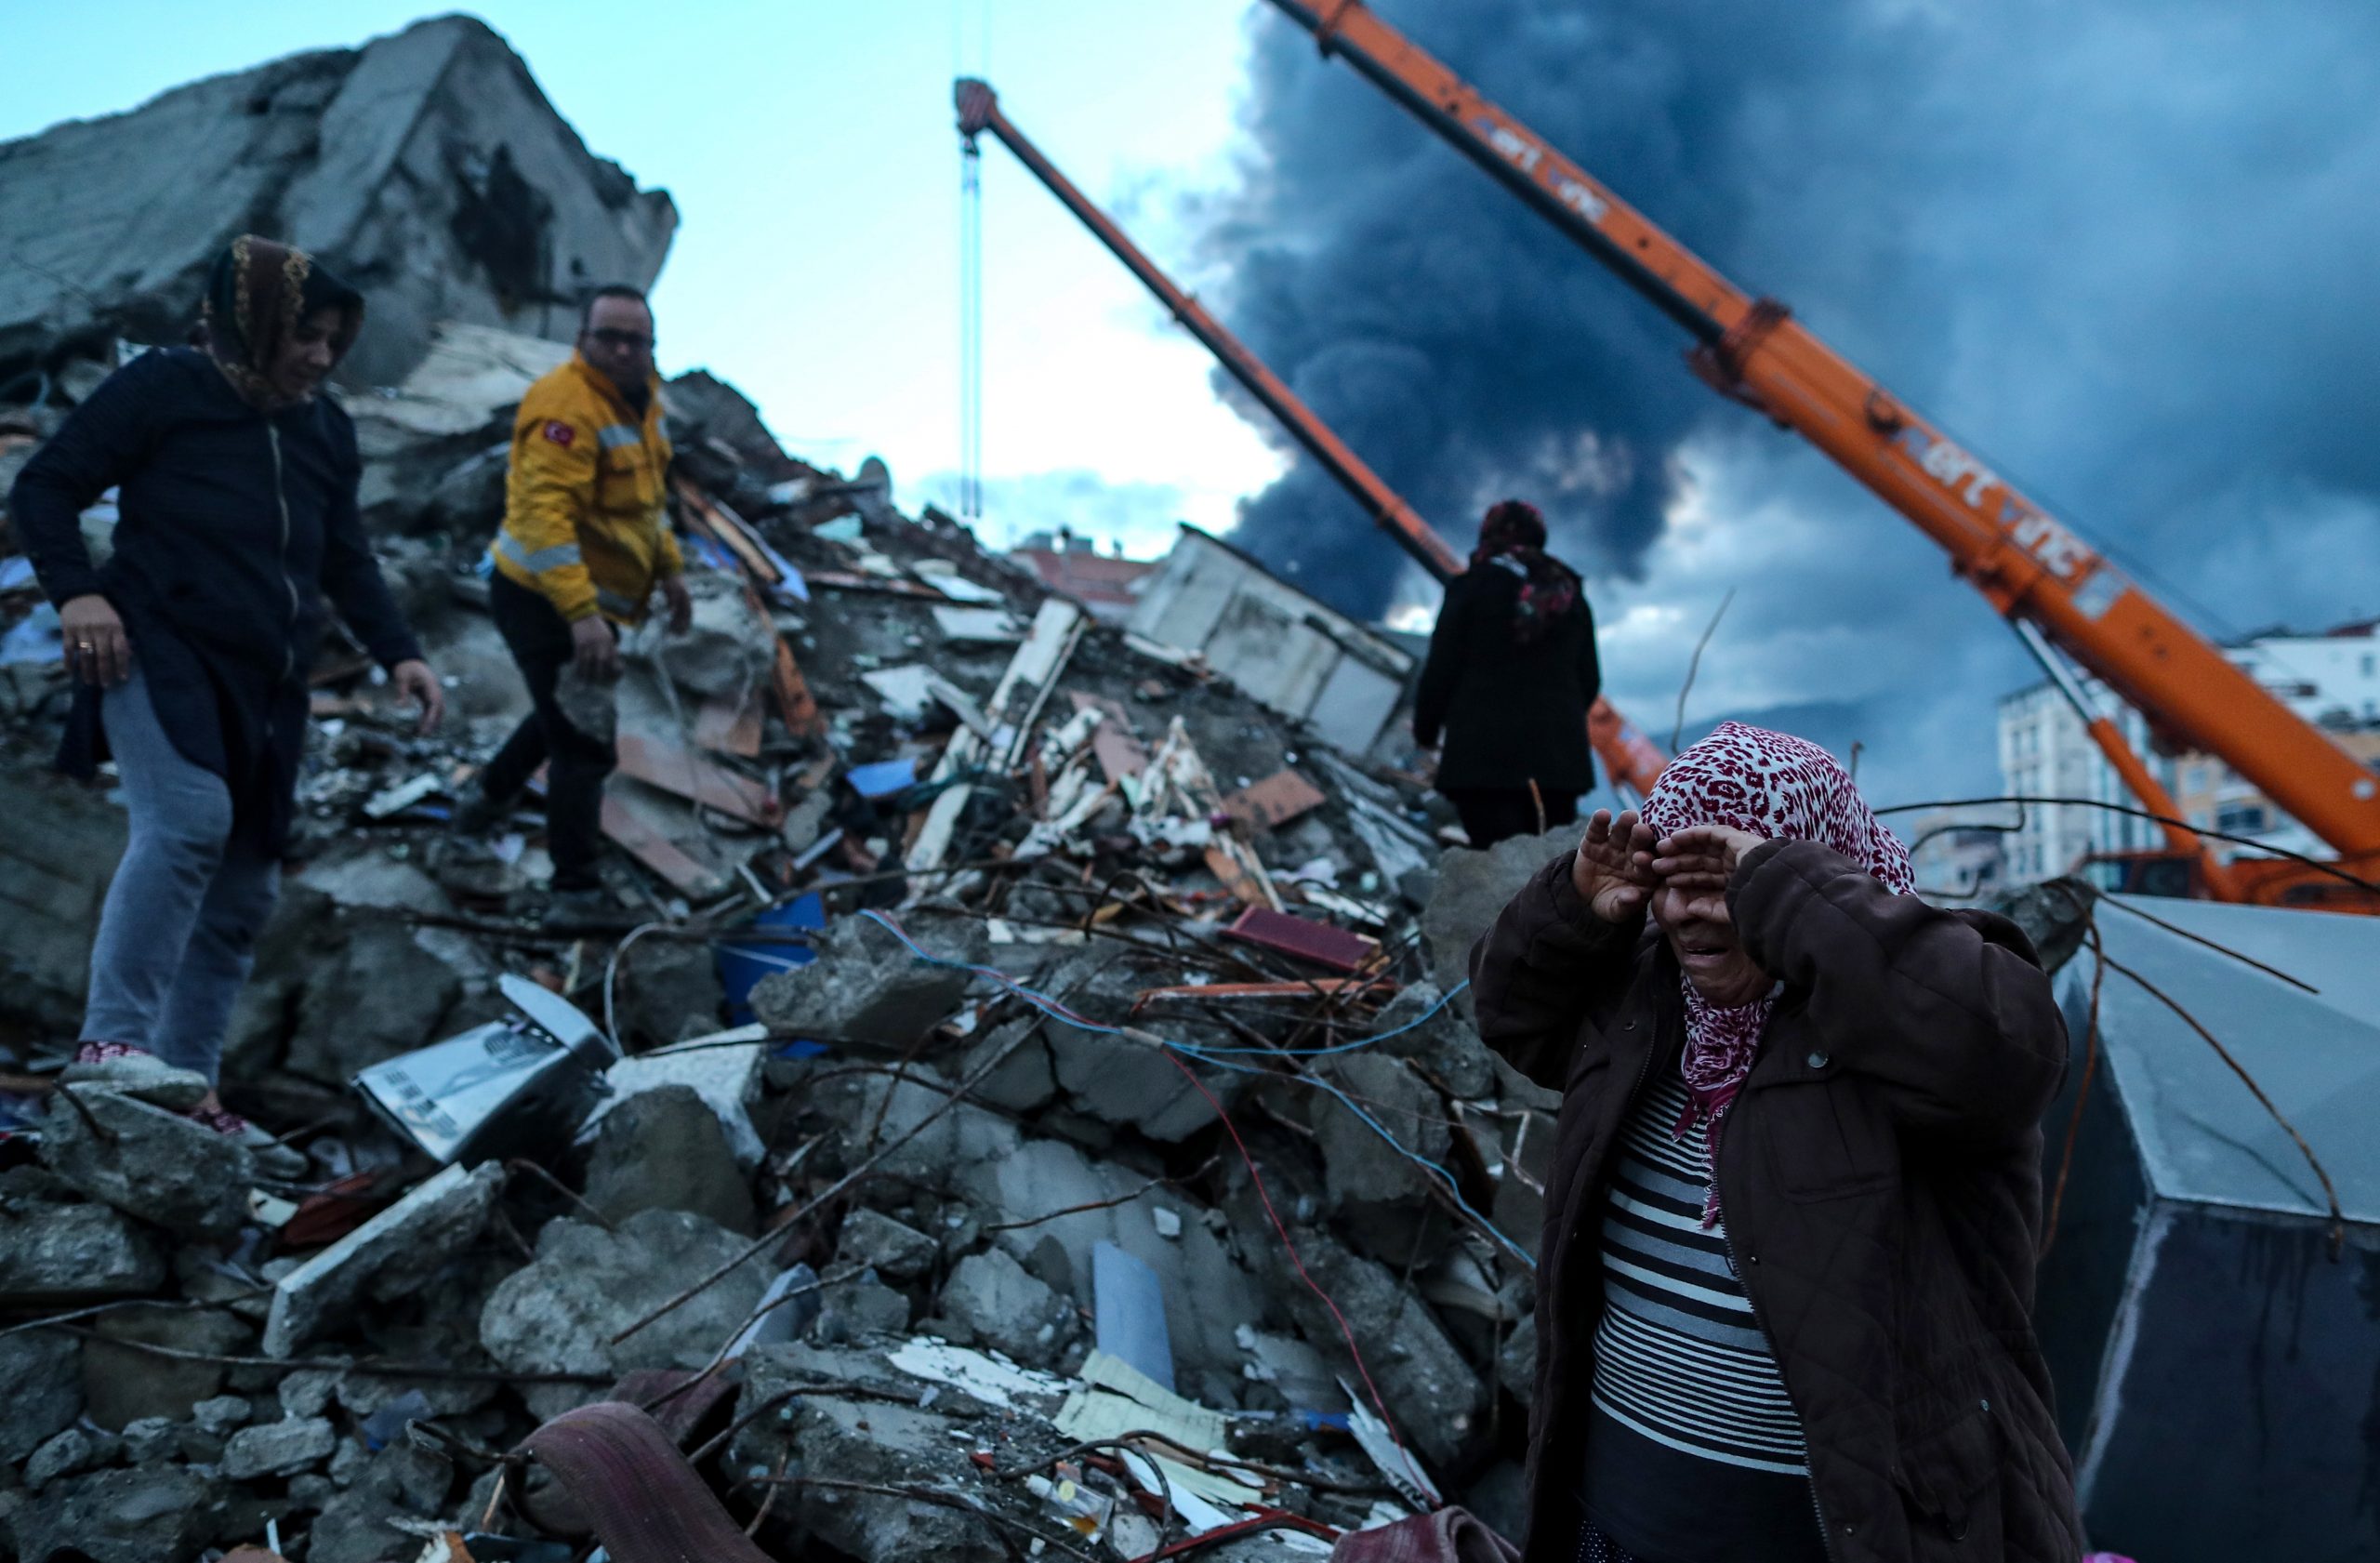 epa10452065 A woman reacts as emergency personnel carry out a search and rescue operation at the site of a collapsed building following an earthquake in Iskenderun, district of Hatay, Turkey, 07 February 2023. More than 4,000 people were killed and thousands more injured after a major 7.8 magnitude earthquake struck southern Turkey and northern Syria on 06 February. Authorities fear the death toll will keep climbing as rescuers look for survivors across the region.  EPA/ERDEM SAHIN